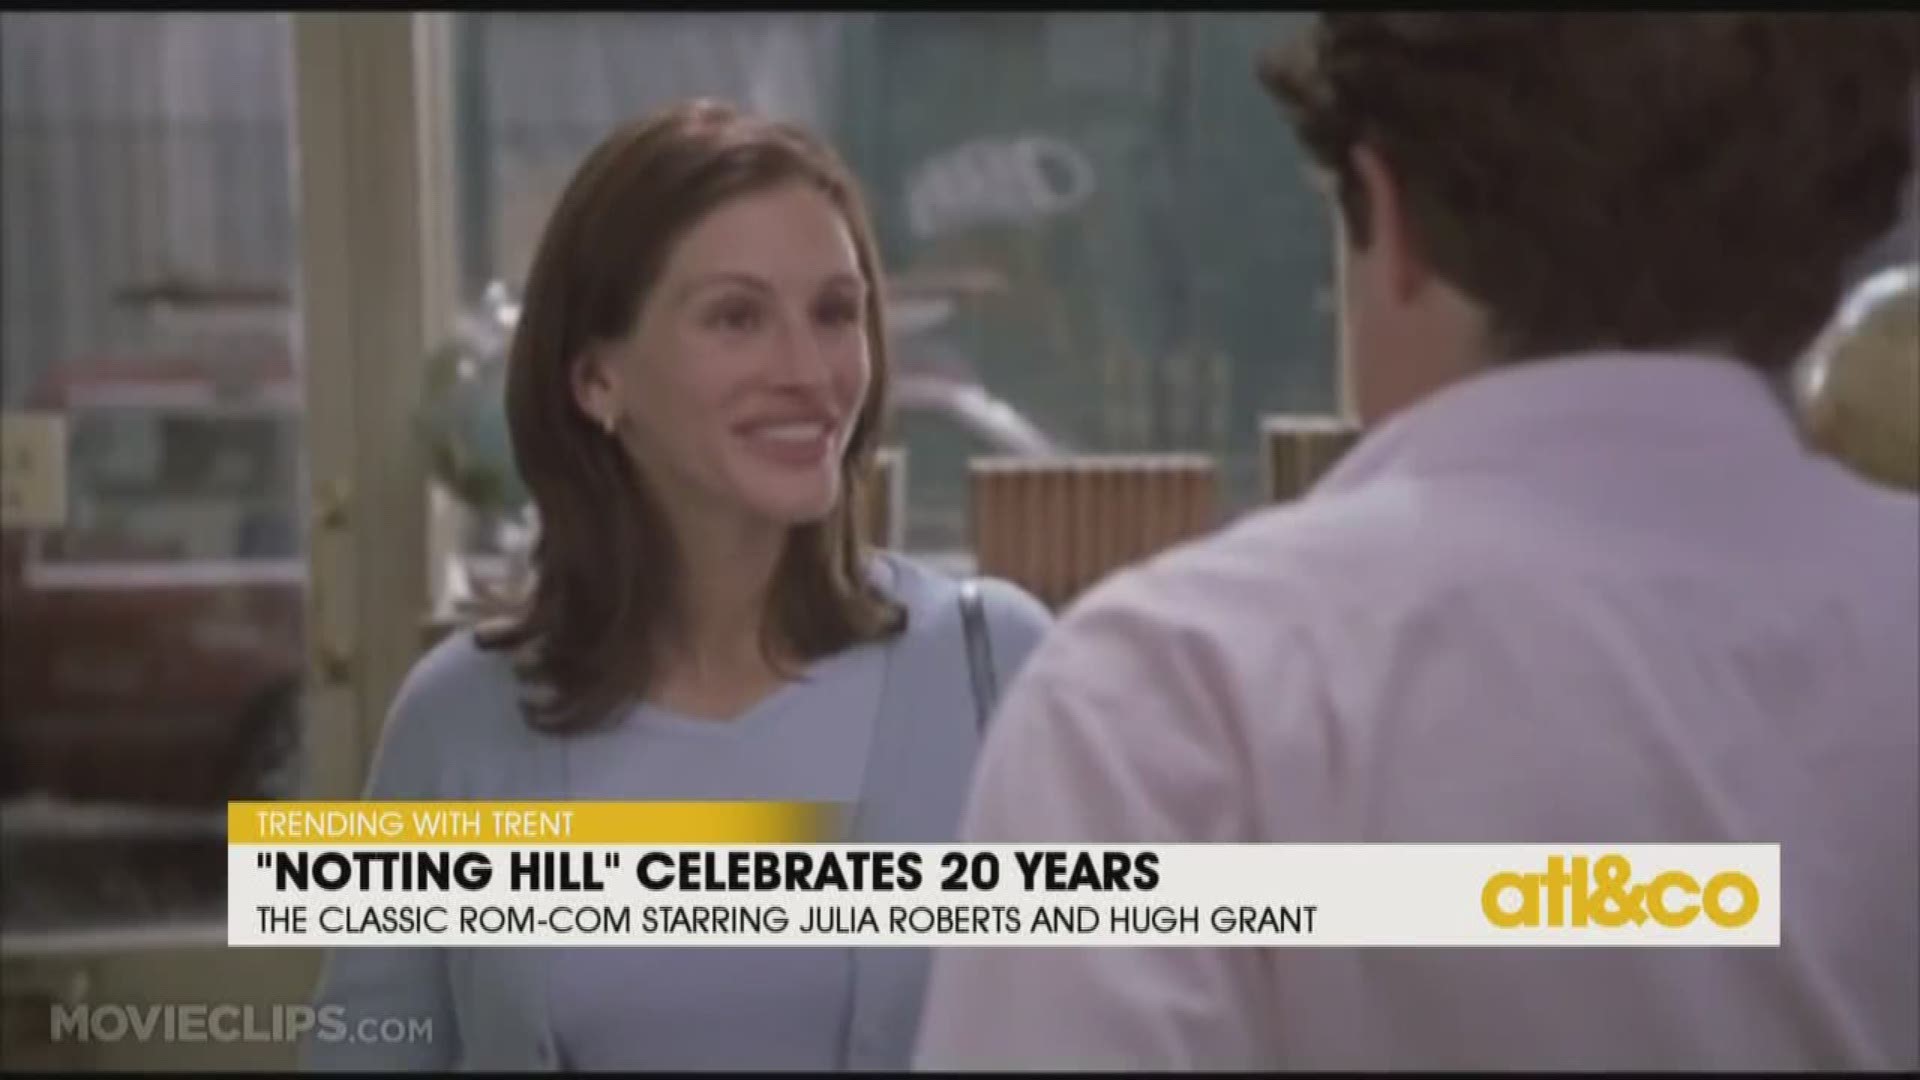 It's been 20 years since Julia Roberts and Hugh Grant's classic rom-com hit theaters. See why it's Trending with Trent on 'Atlanta & Company'